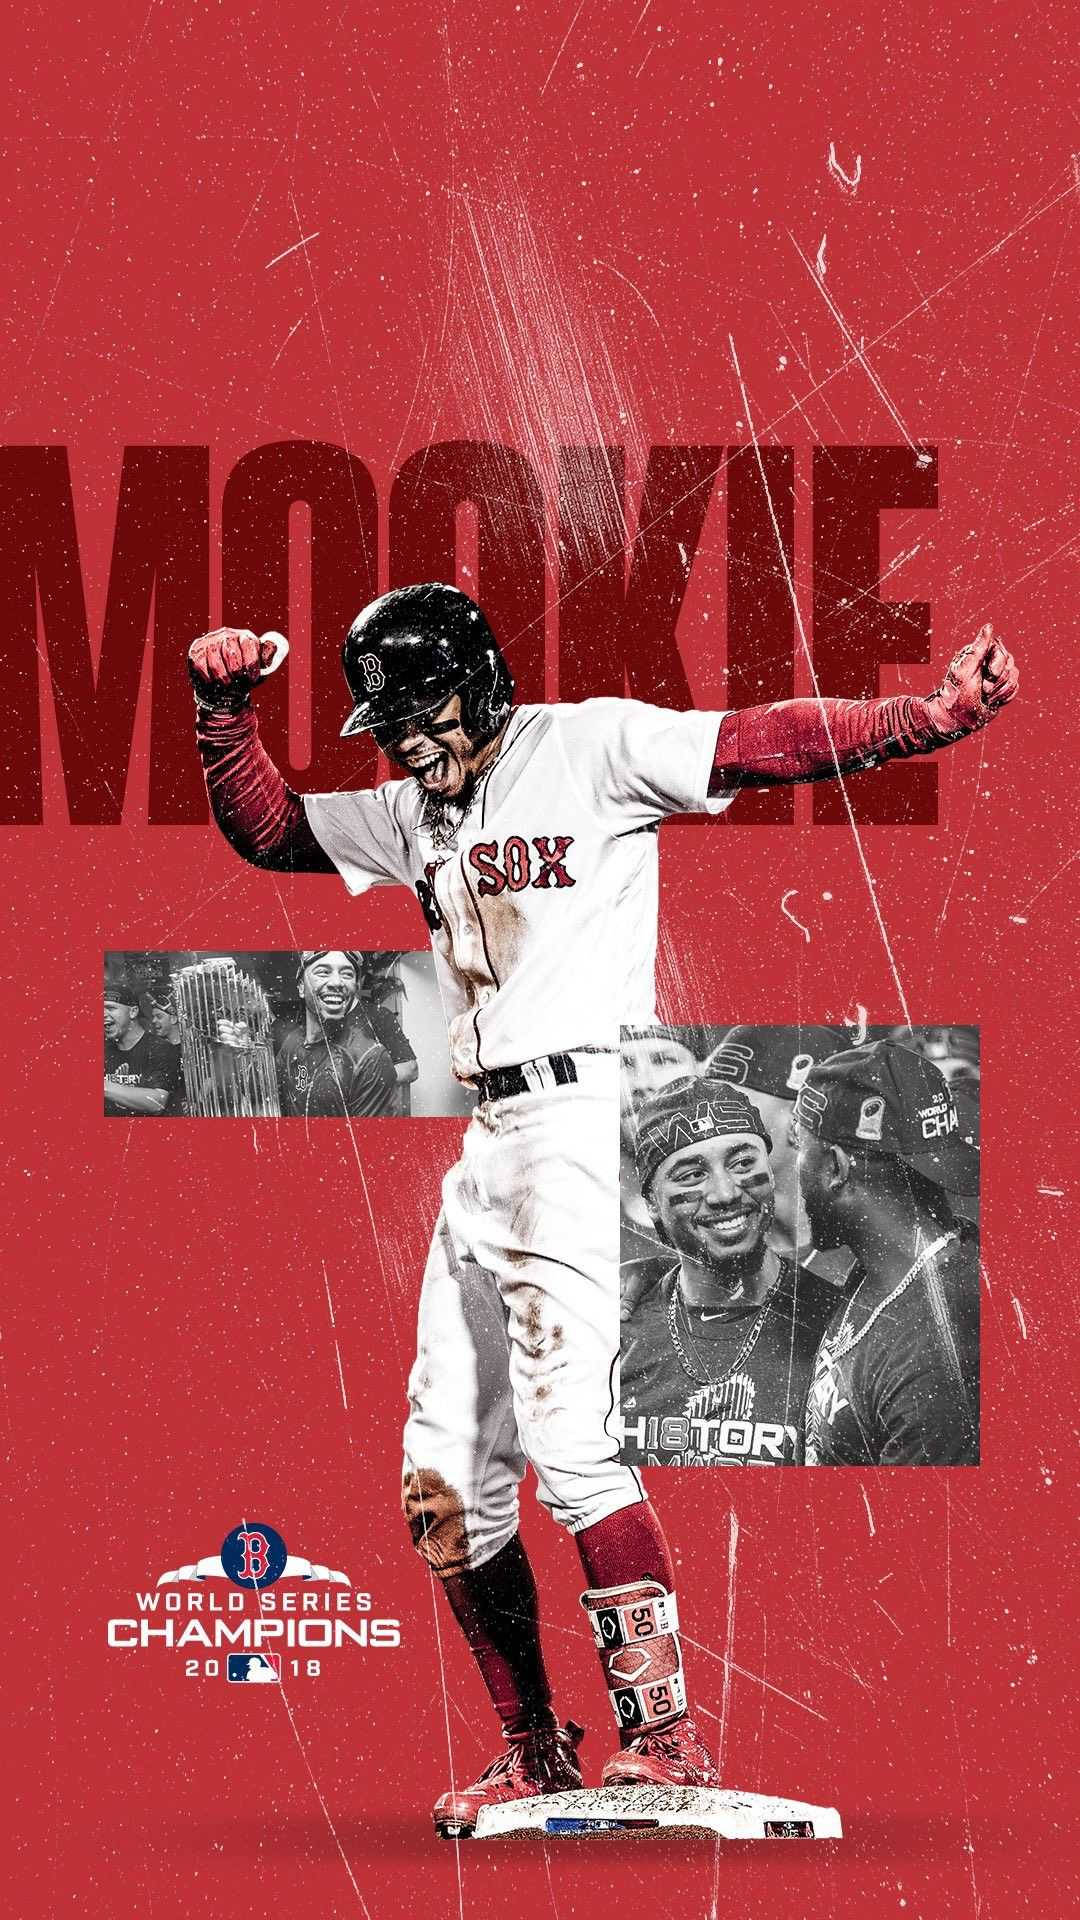 Red Sox Player Mookie Betts Background